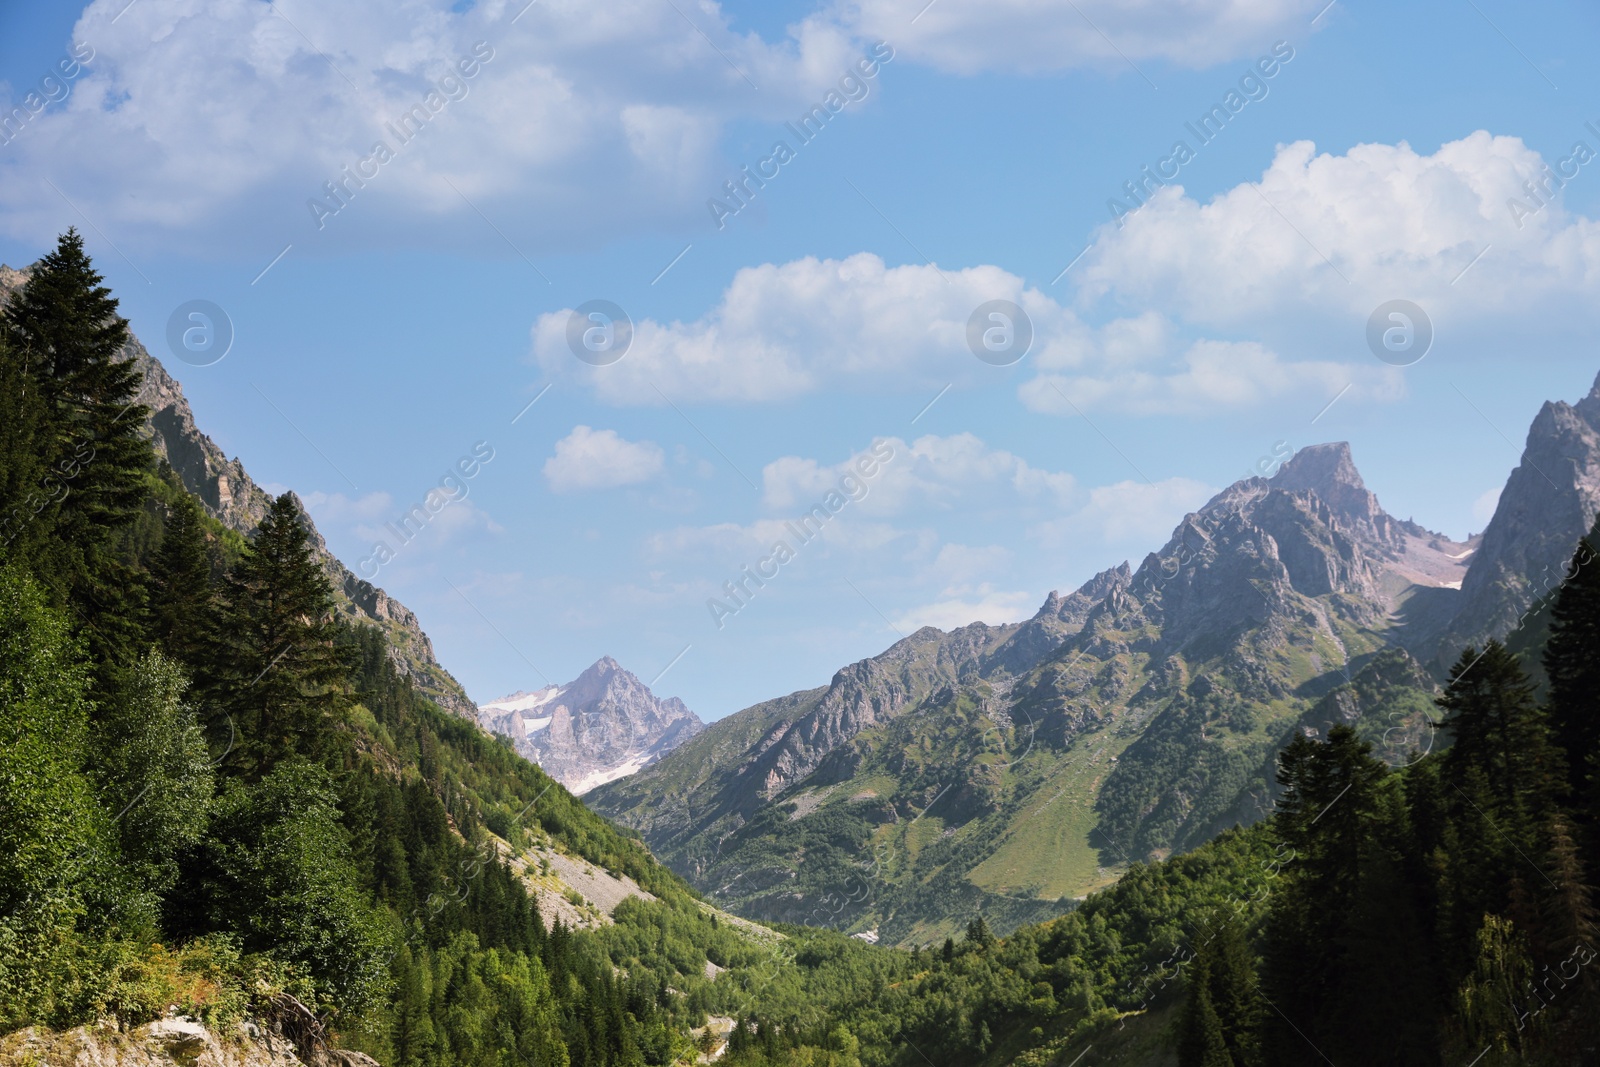 Photo of Picturesque view of trees and mountains under light blue sky outdoors, space for text